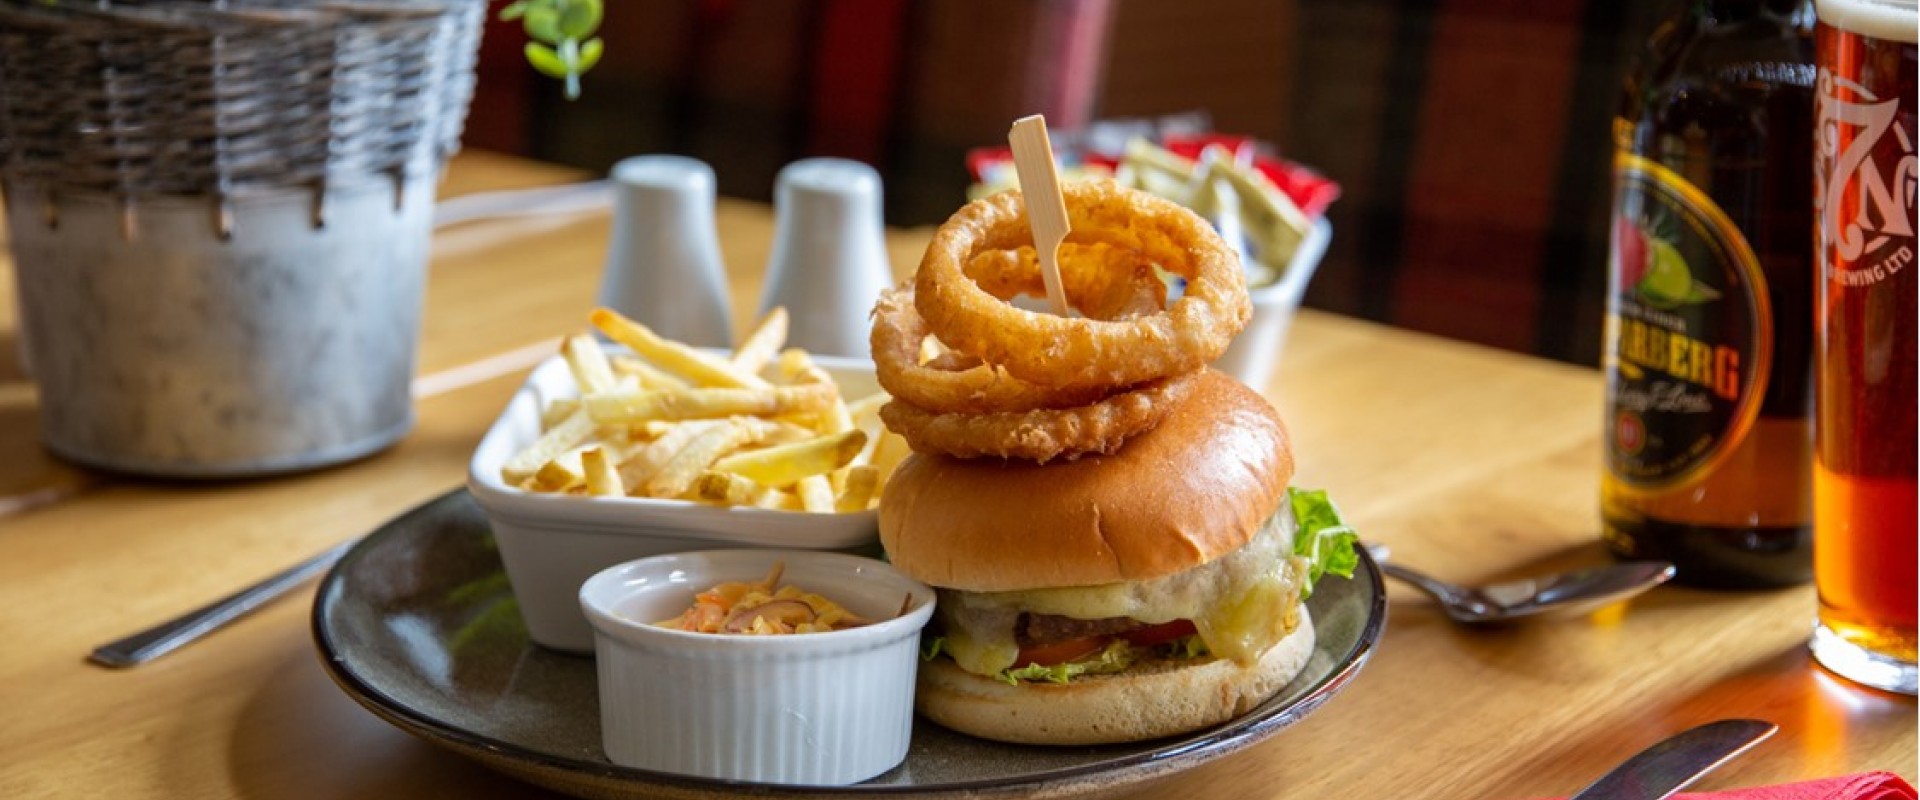 Beef burger with onion rings